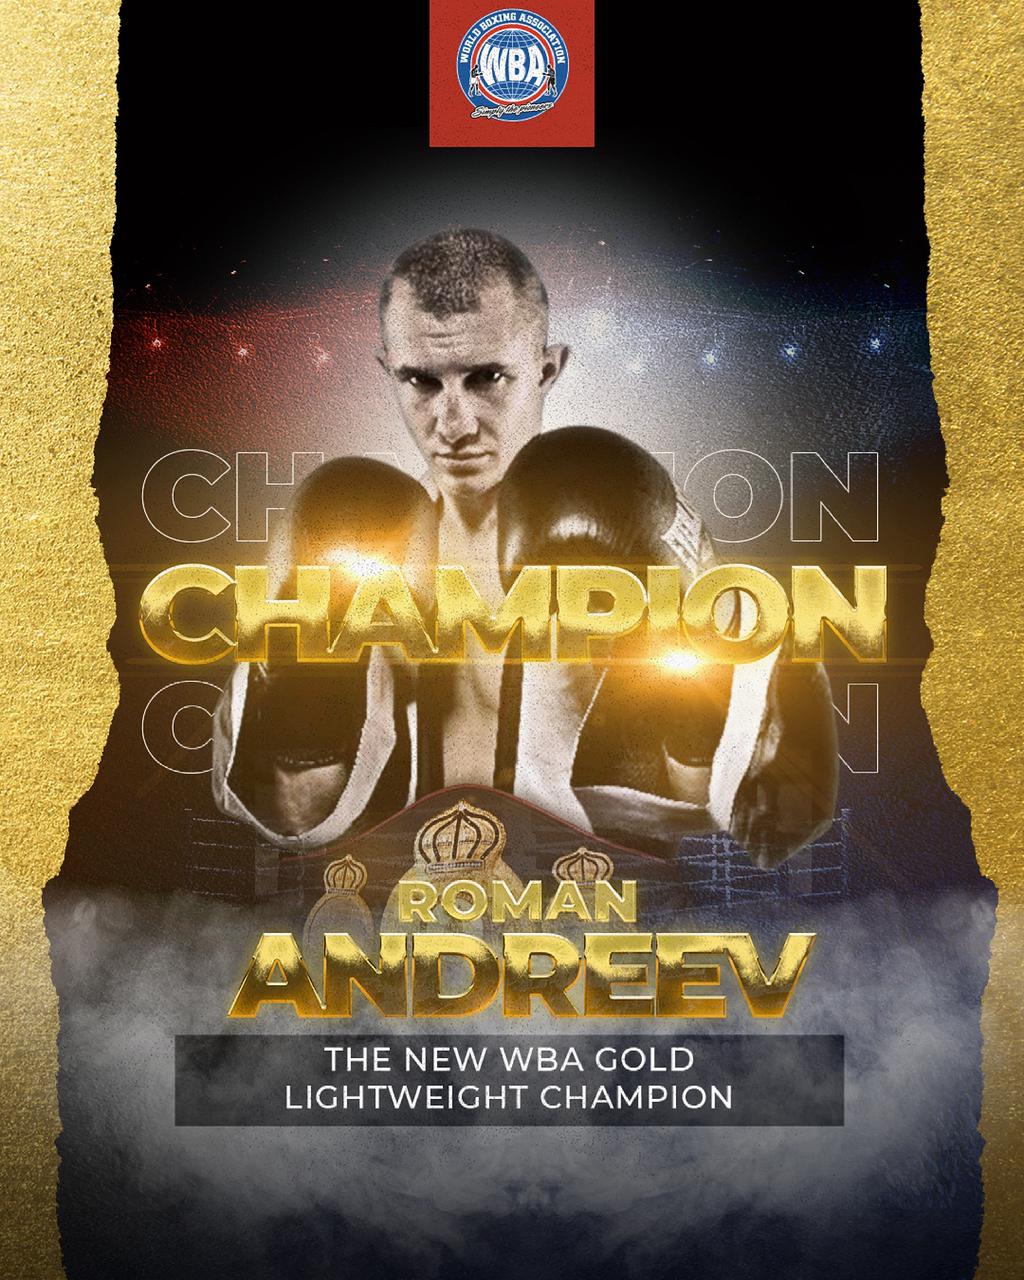 Roman Andreev defeats Fonseca and is the new WBA-Gold Lightweight champion